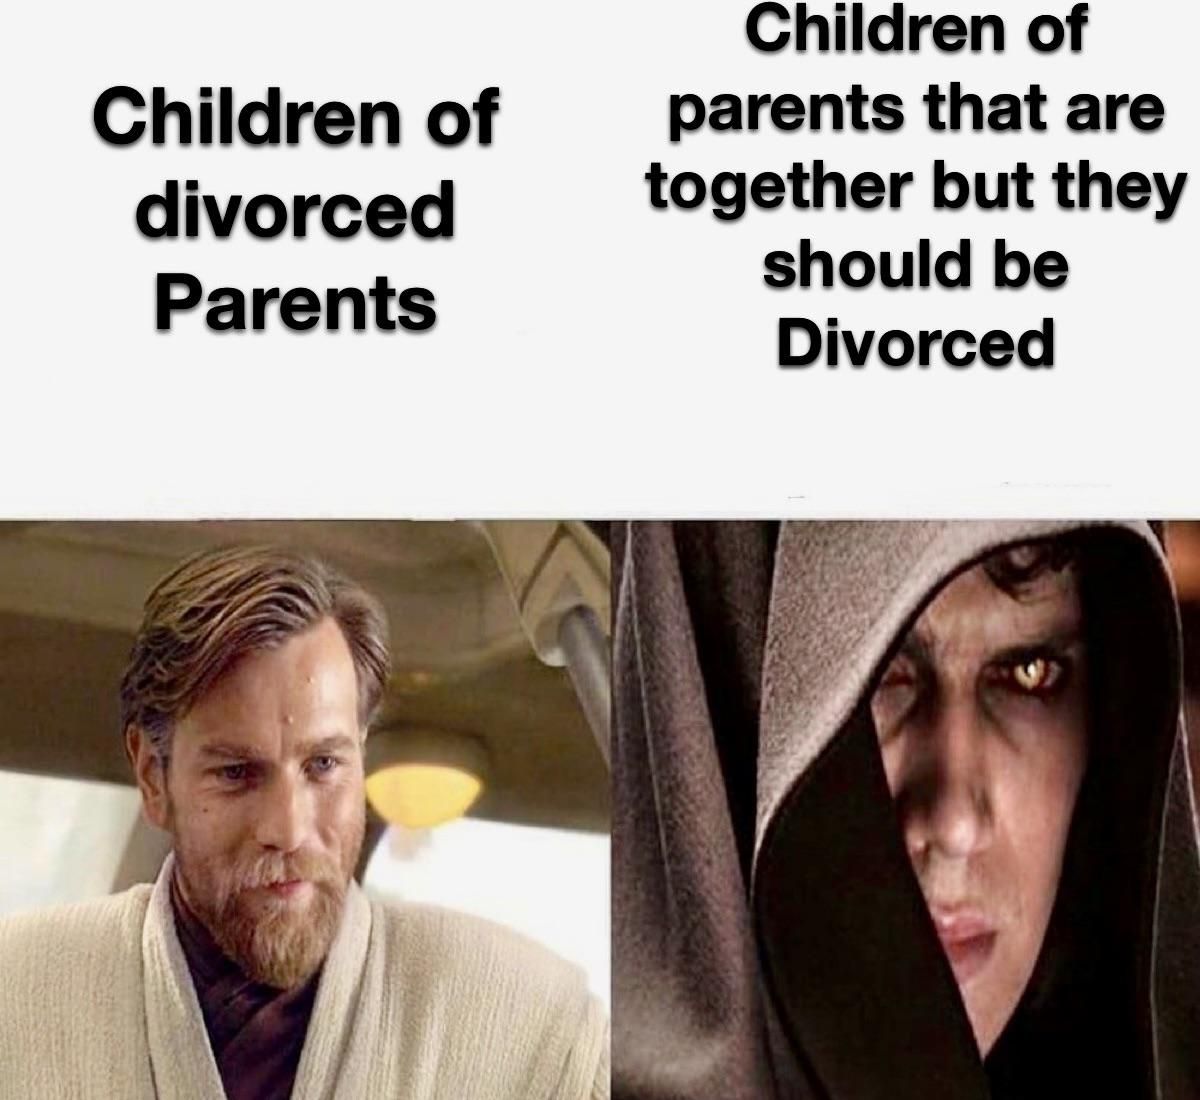 Twice the gifts doble the punishment